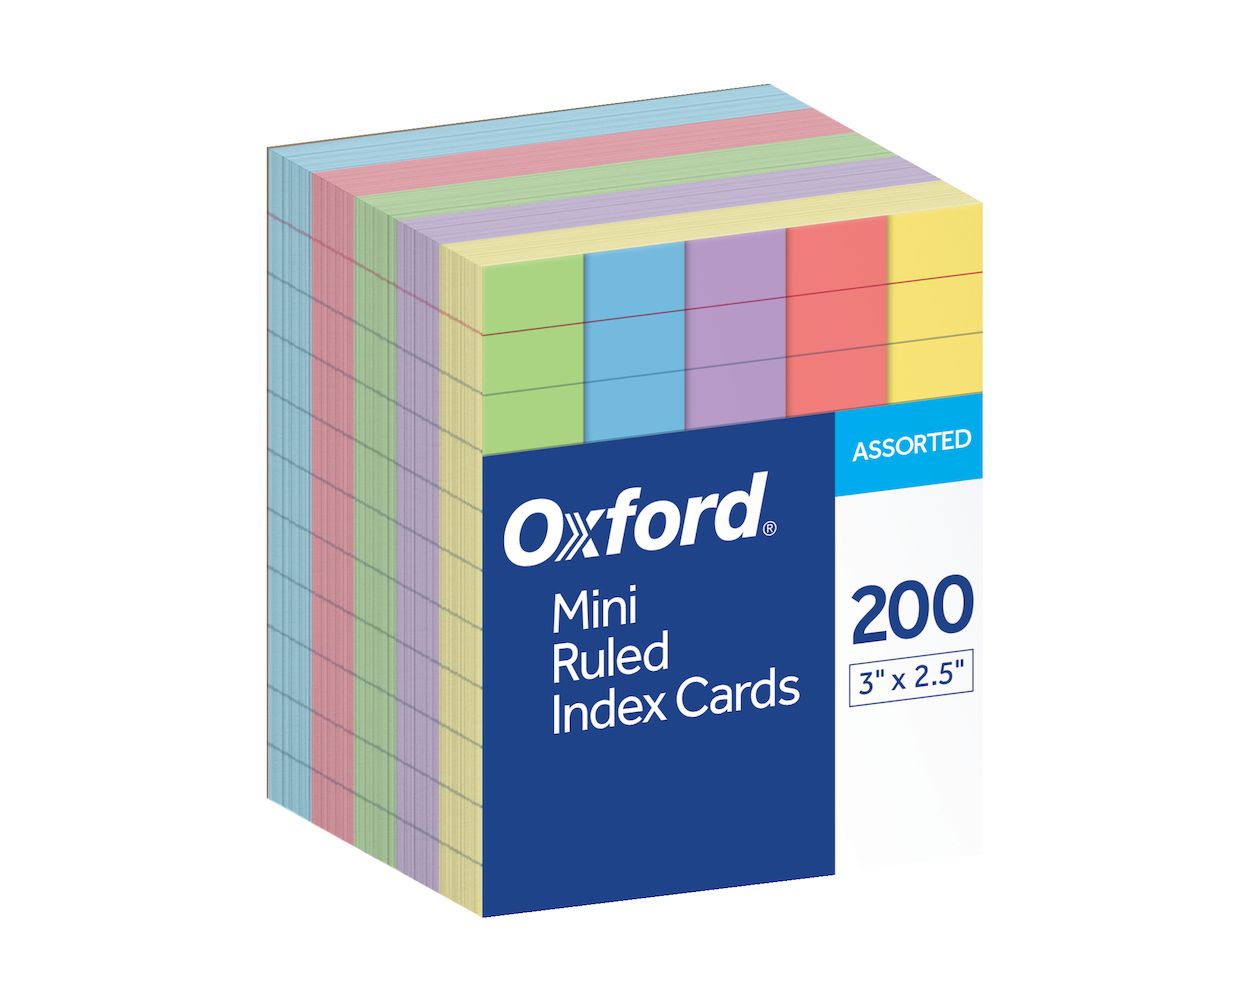 Oxford Pfx10010 Ruled Mini Index Cards 3 X 2 1/2 Assorted 200/pack for sale online 